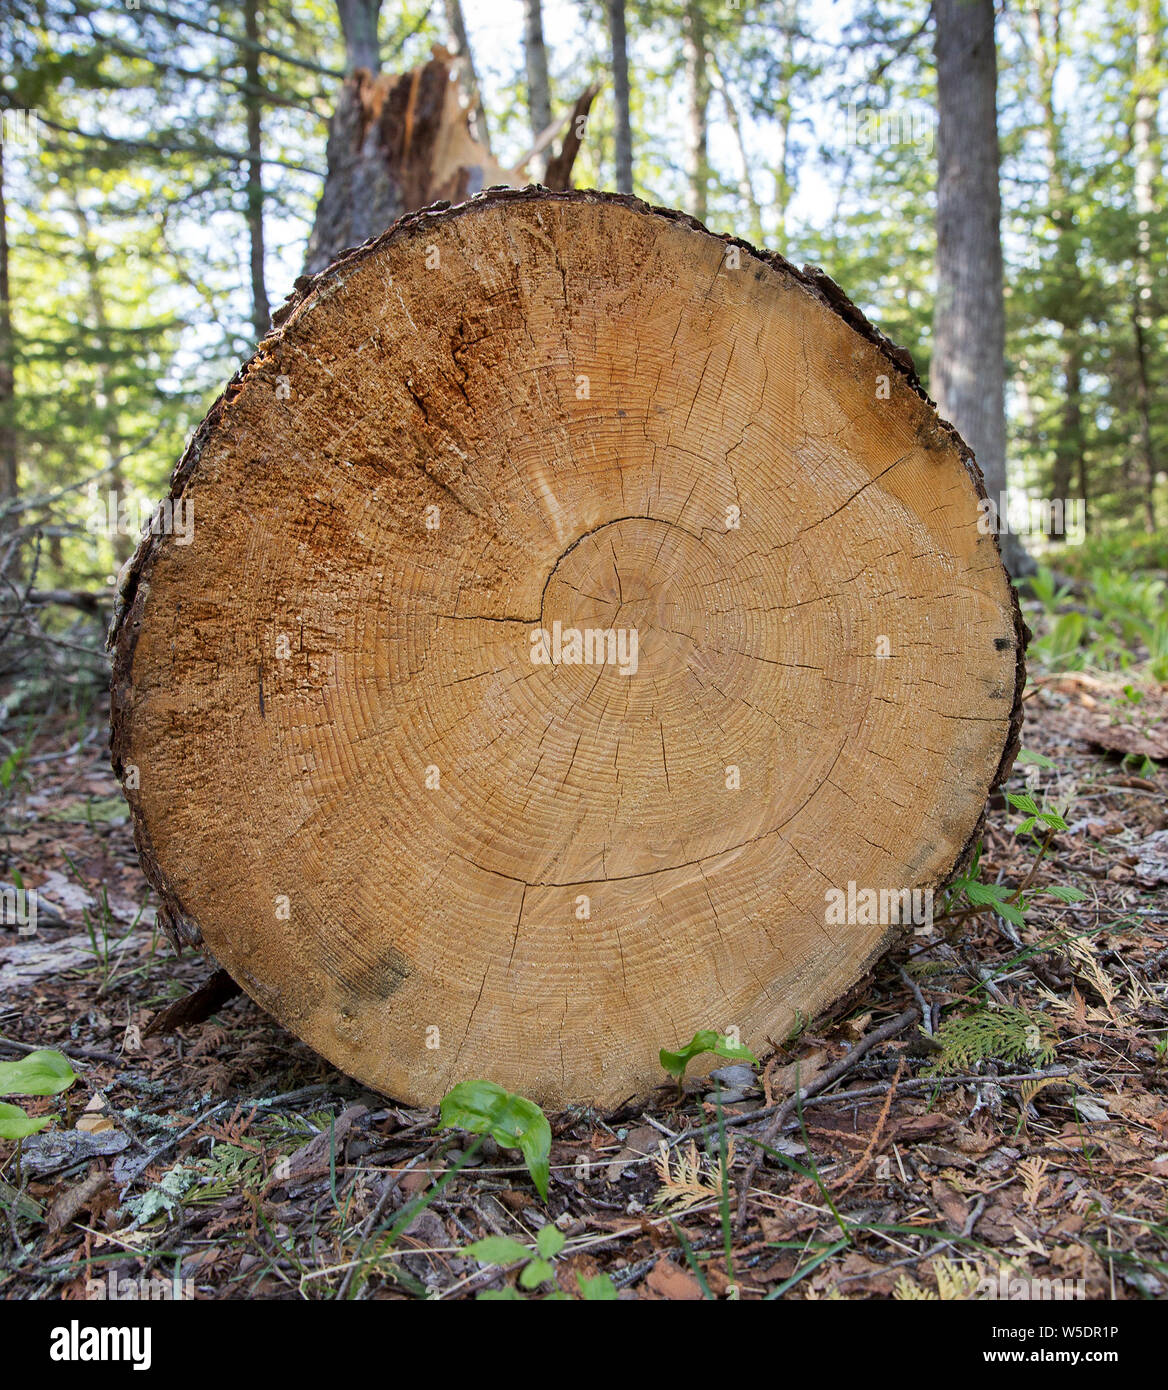 Cross-section of a cut pine tree in Cascade River State Park along the North Shore of Lake Superior, Minnesota Stock Photo